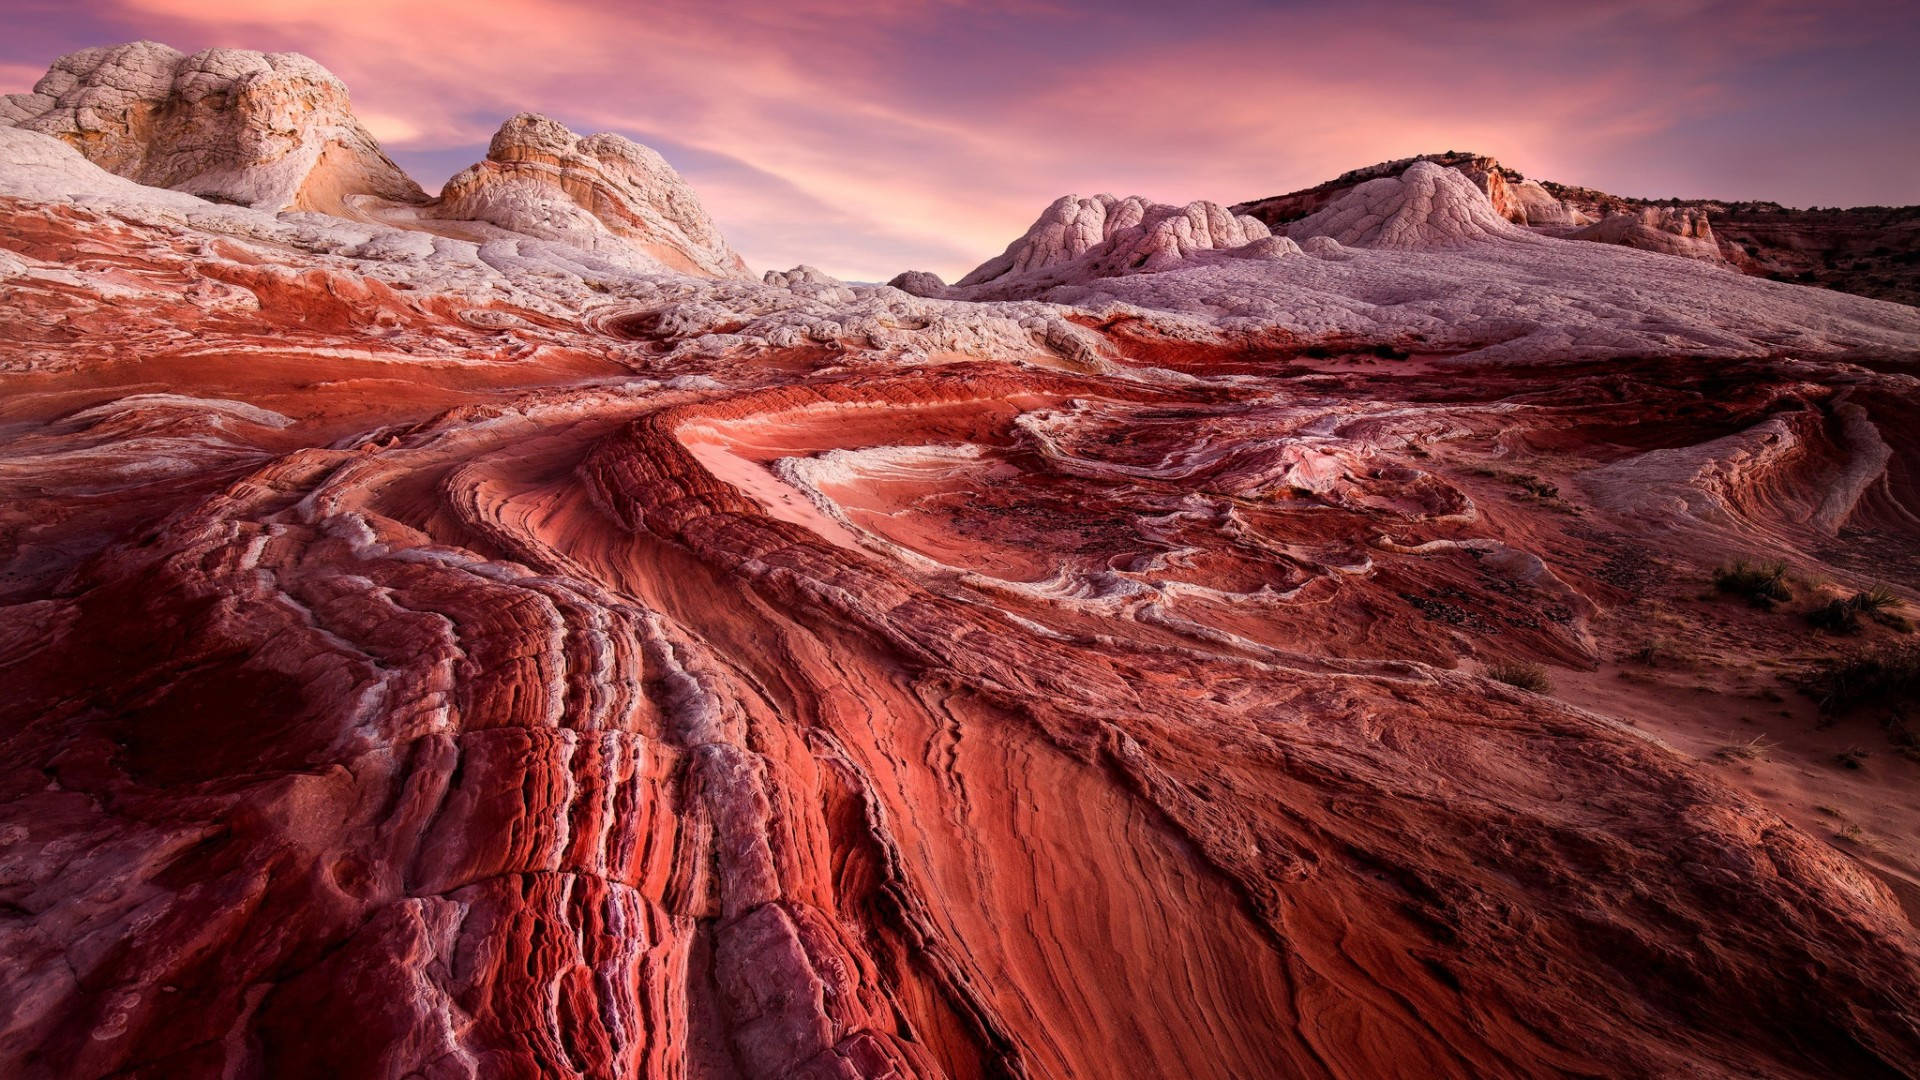 Majestic Red Rock Formations In The Heart Of Arizona Desert Background